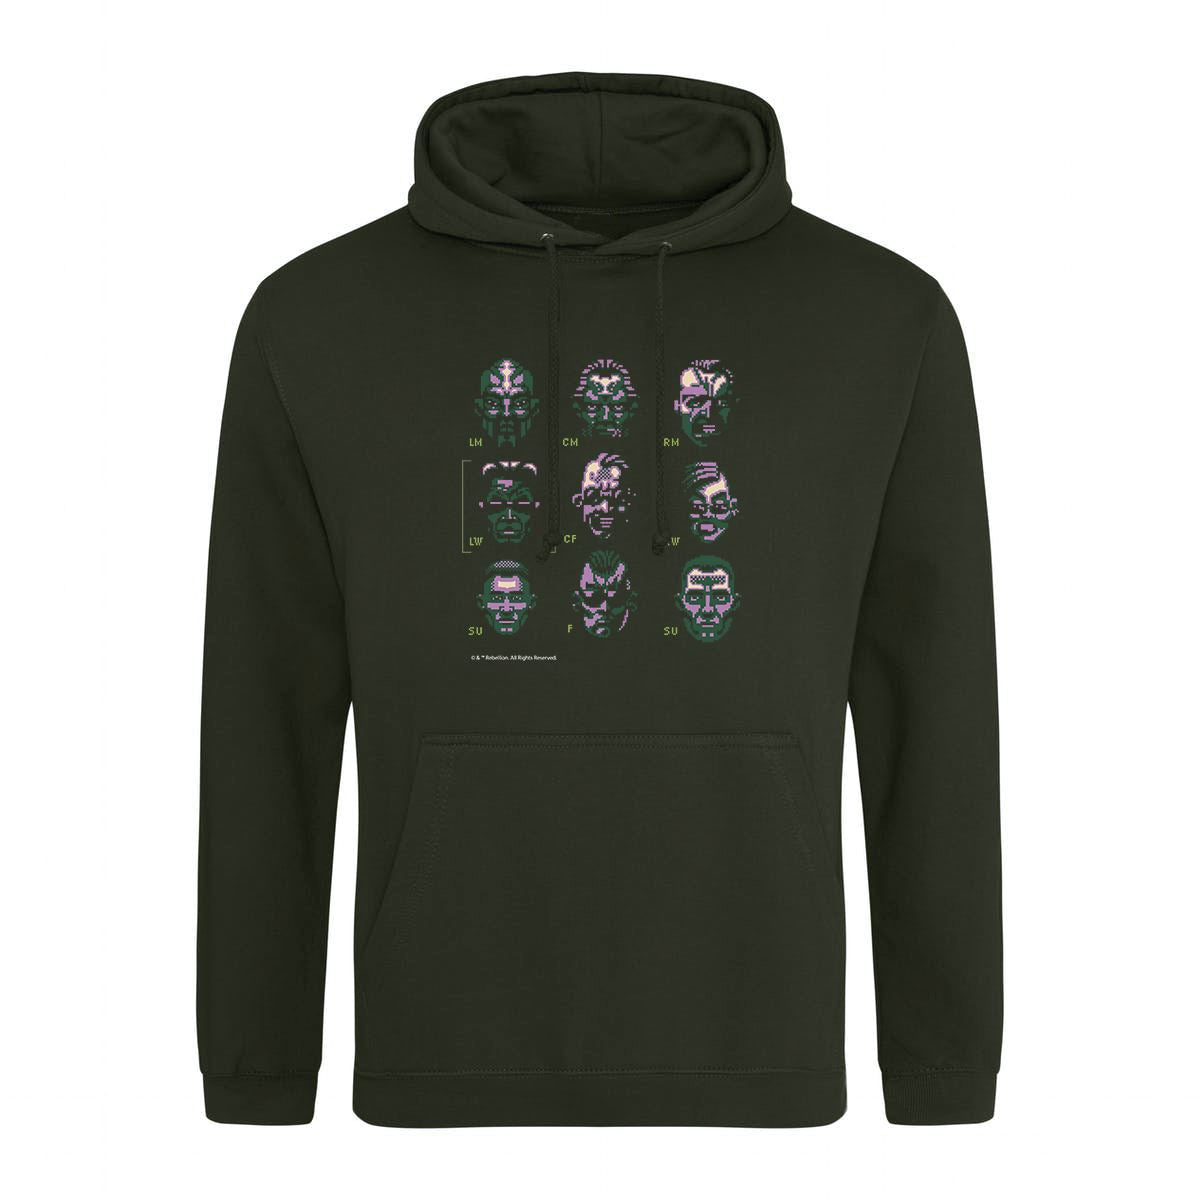 Speedball II Team Retro Gaming Hoodie Hoodie Seven Squared Small 36" Chest Combat Green 